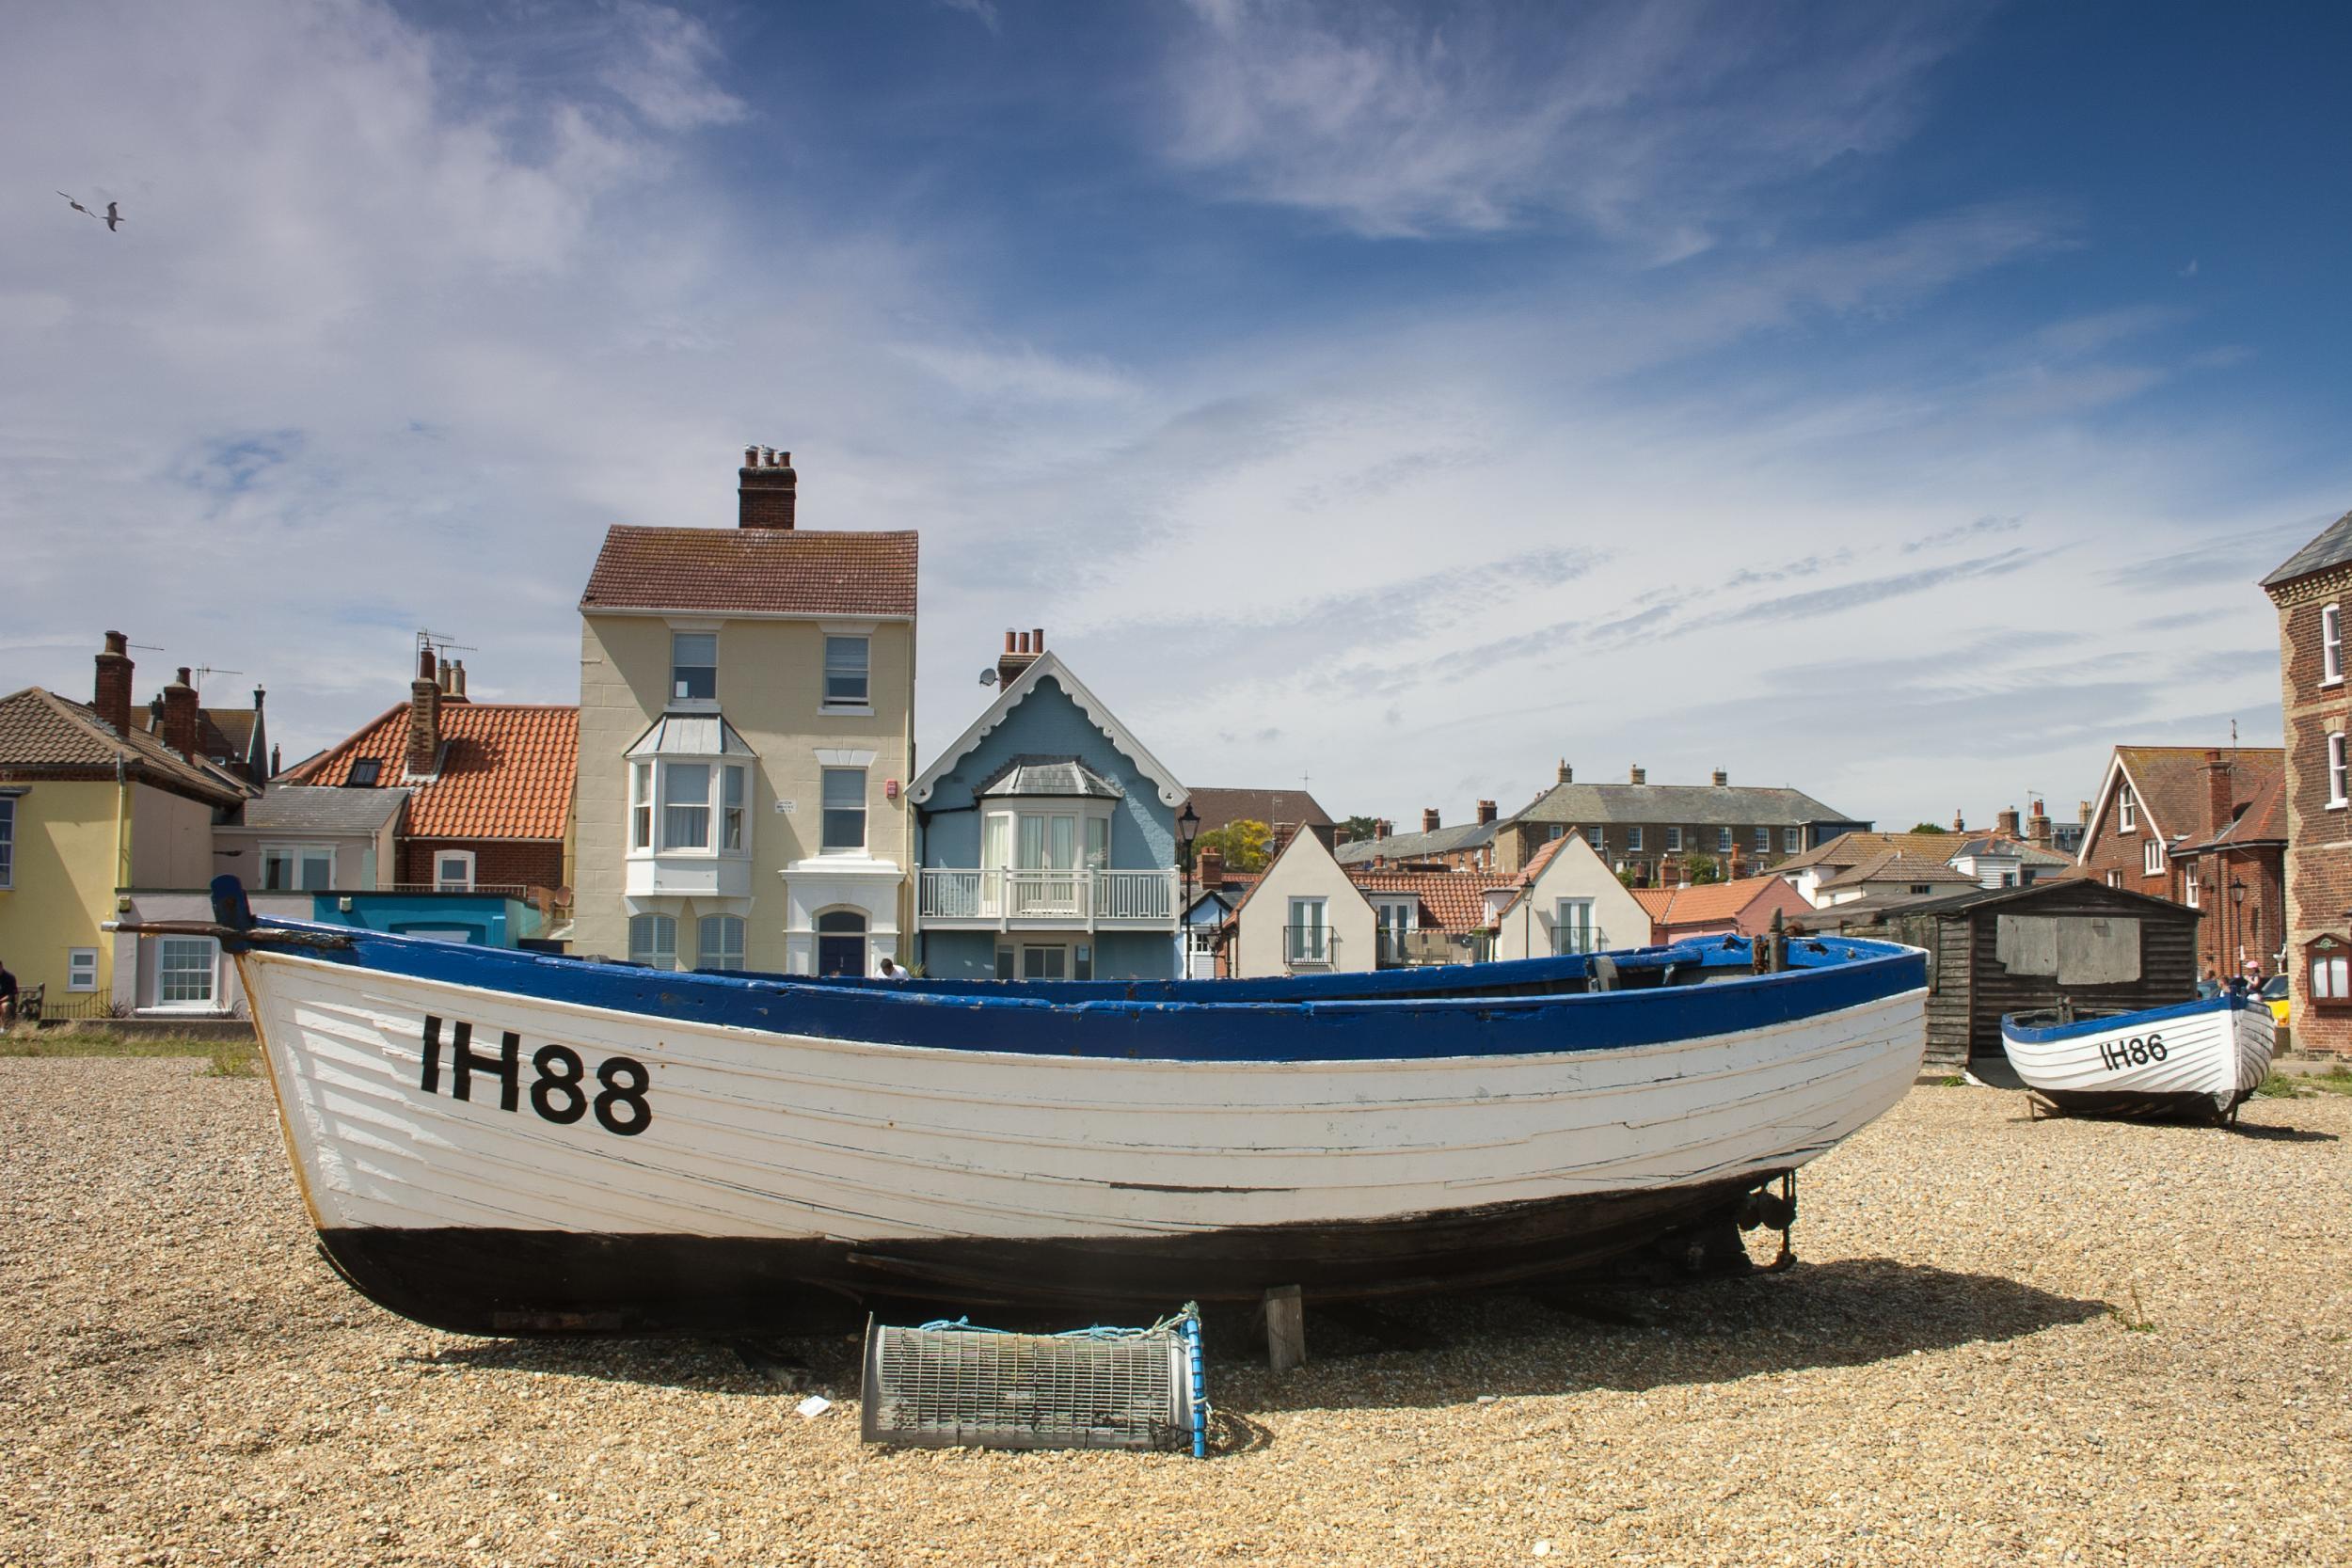 Aldeburgh in Suffolk is known for the UK’s best fish and chips shops (iStock)